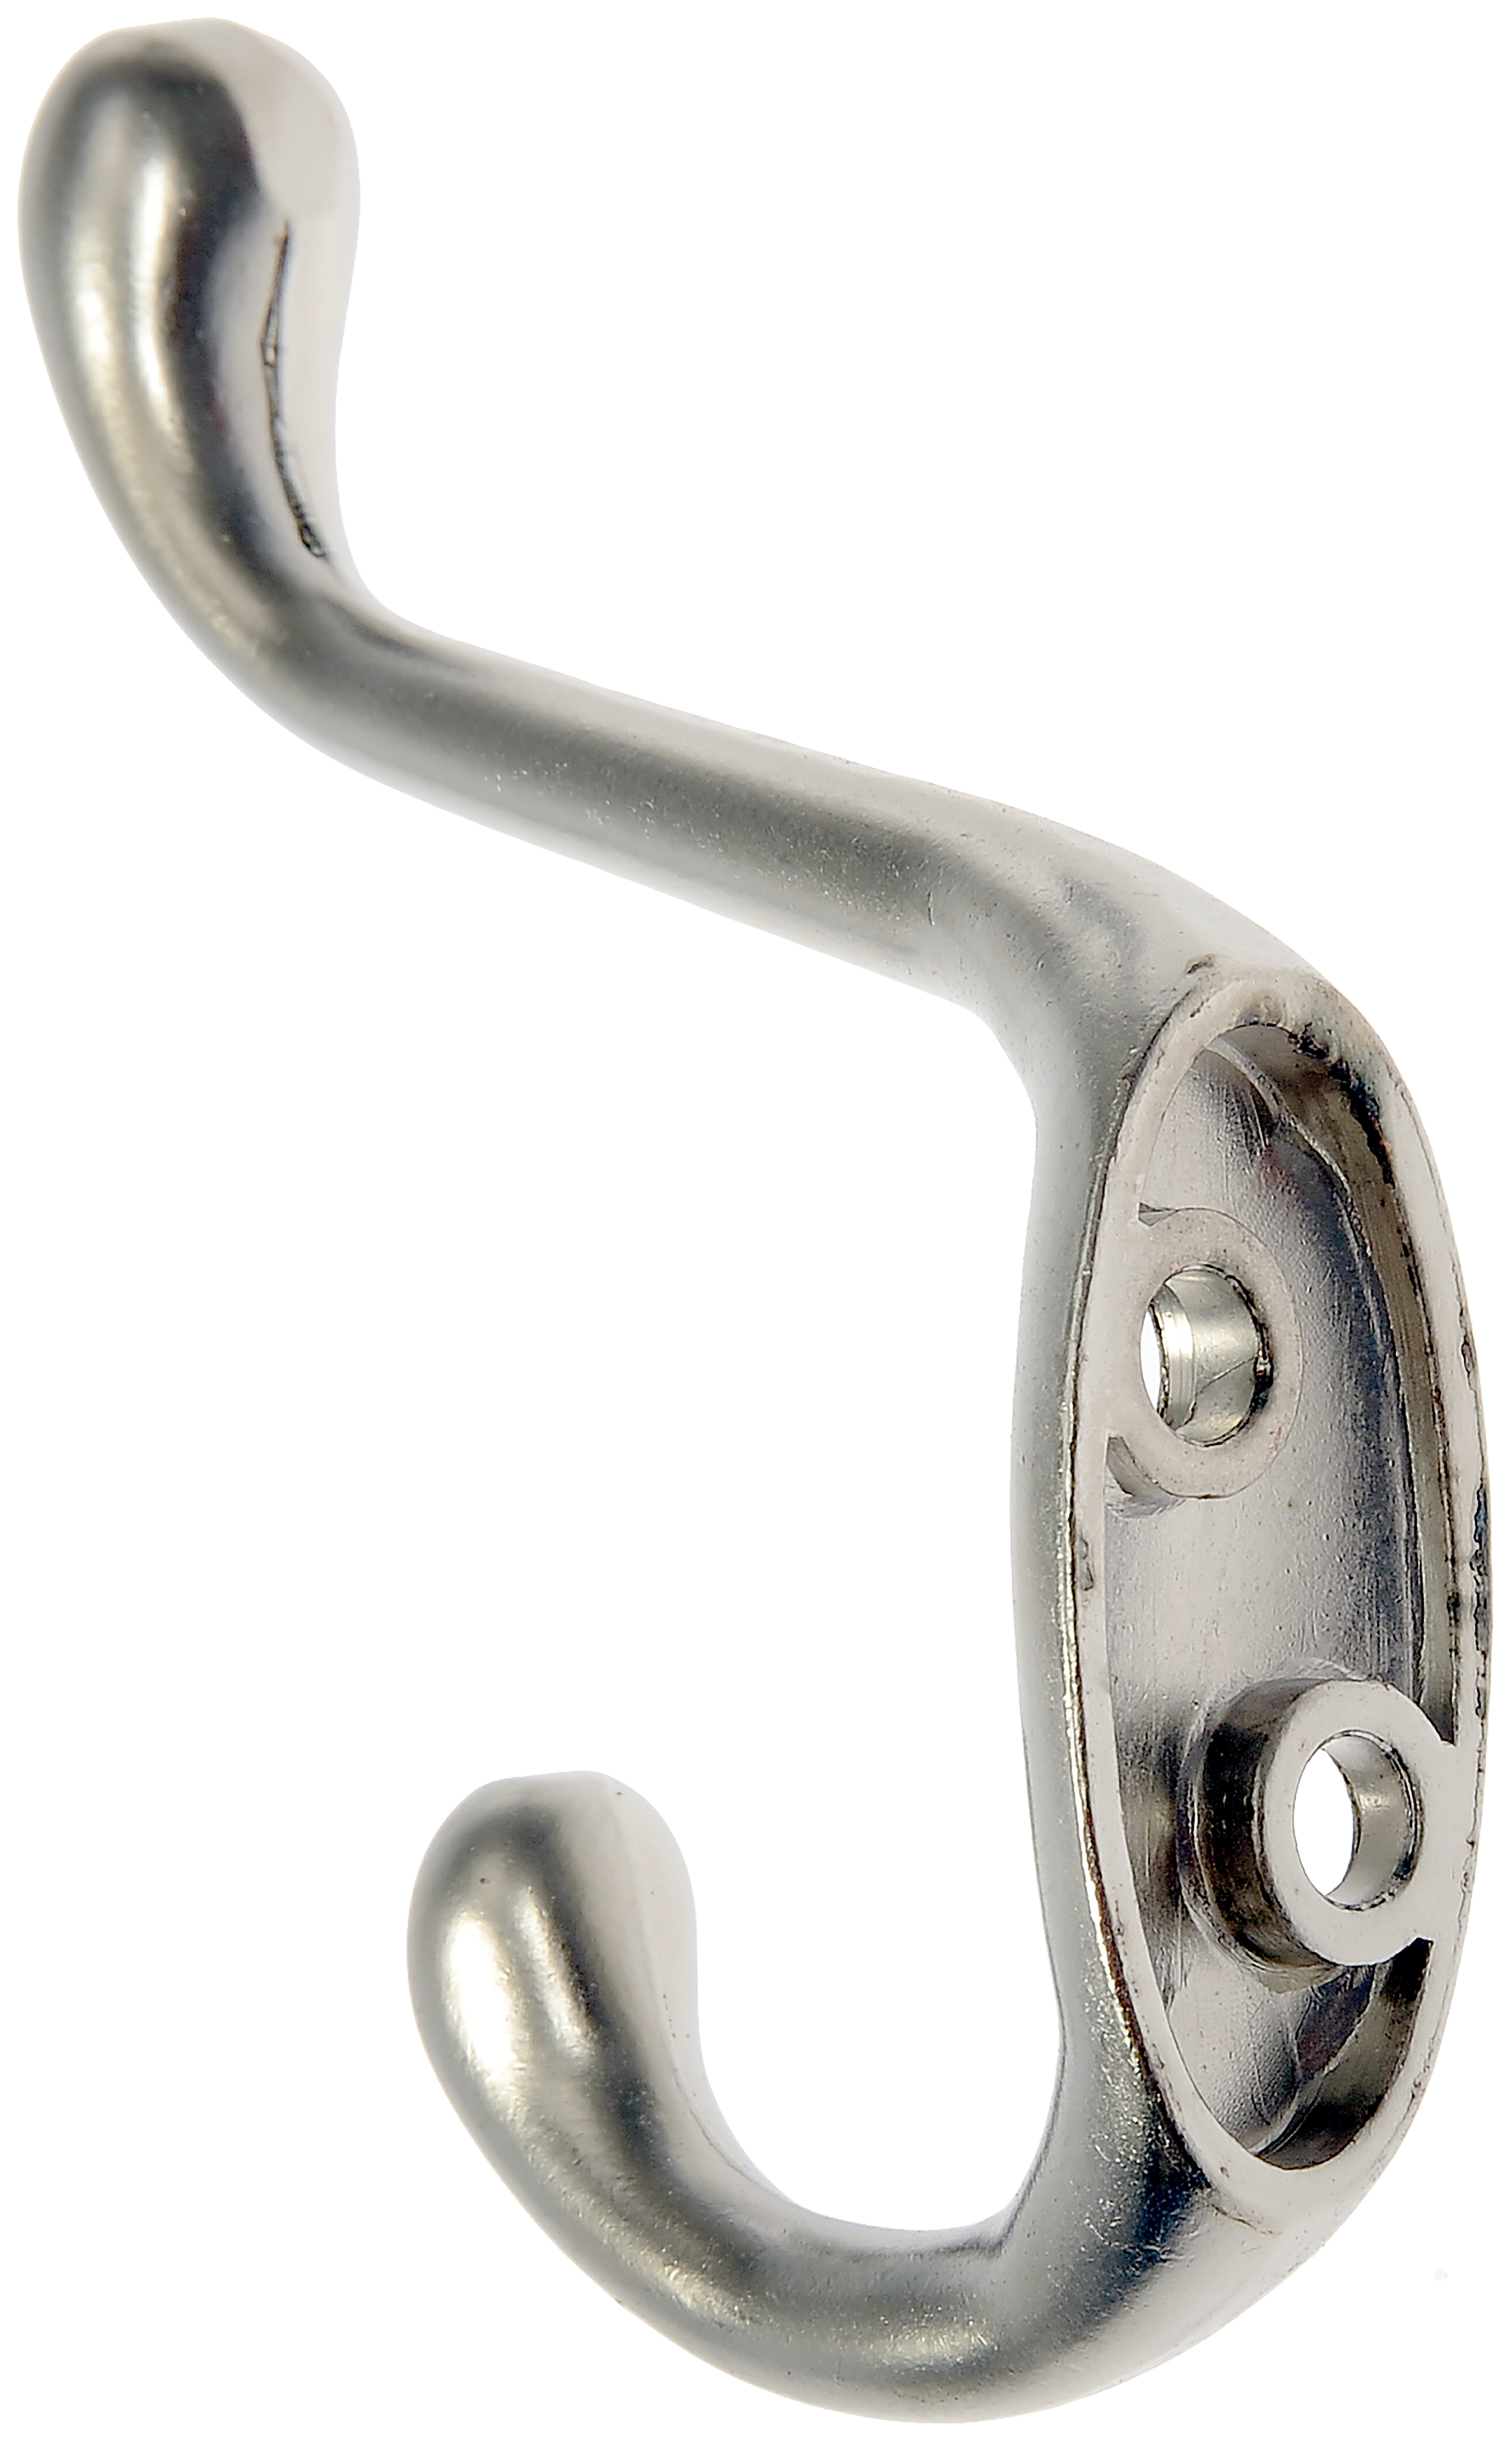 2 x Traditional Double Coat Door Hooks Chrome by Securit 